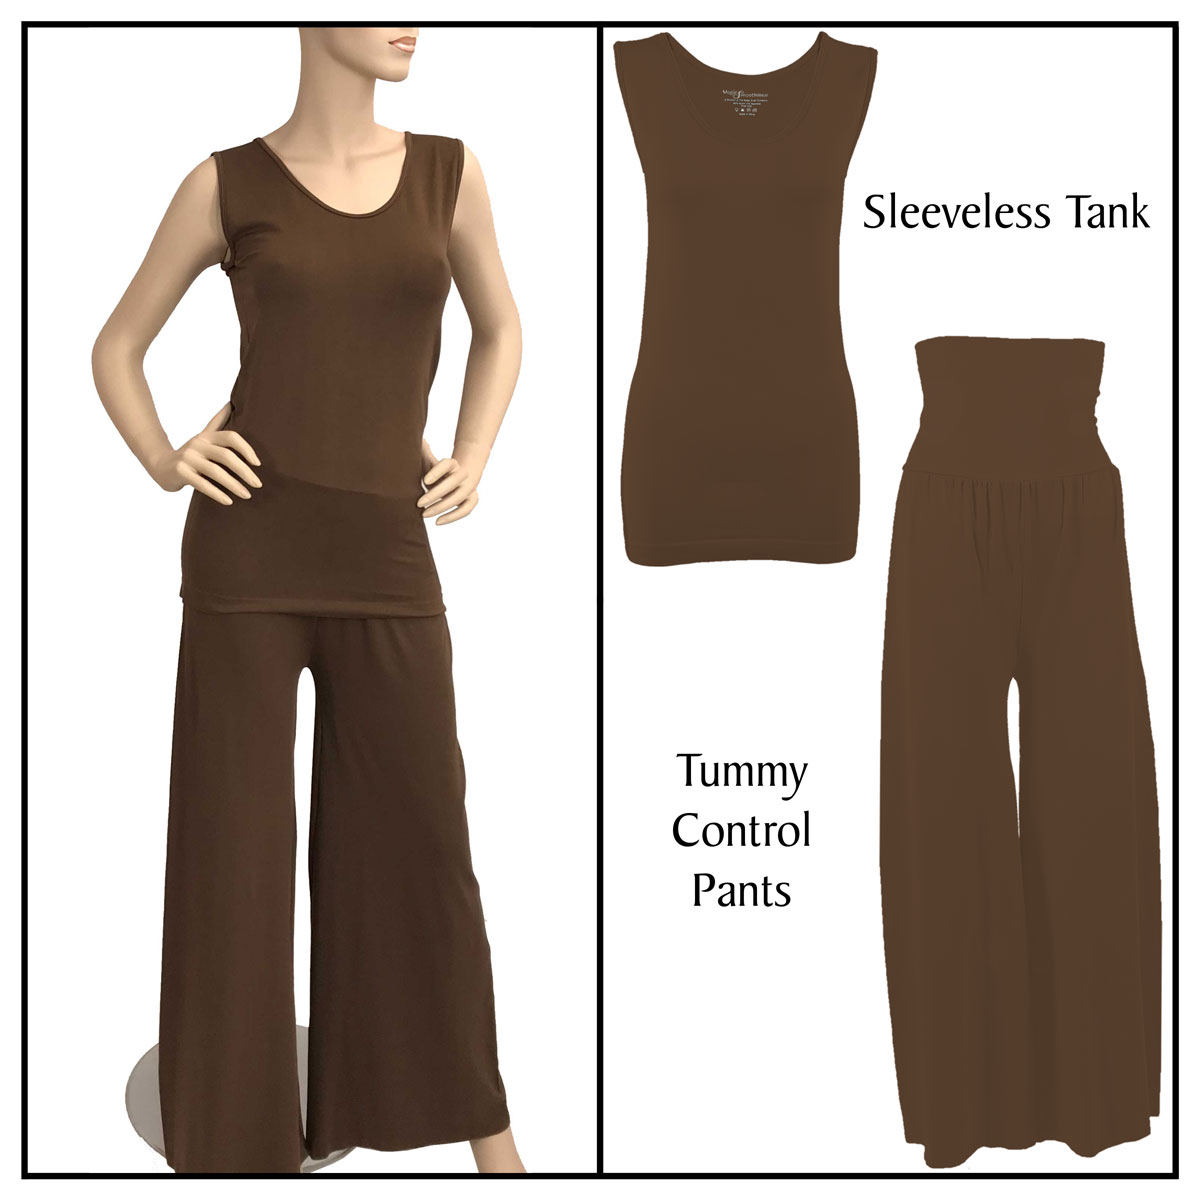 Chestnut Sleeveless Top (One Size) with Pants